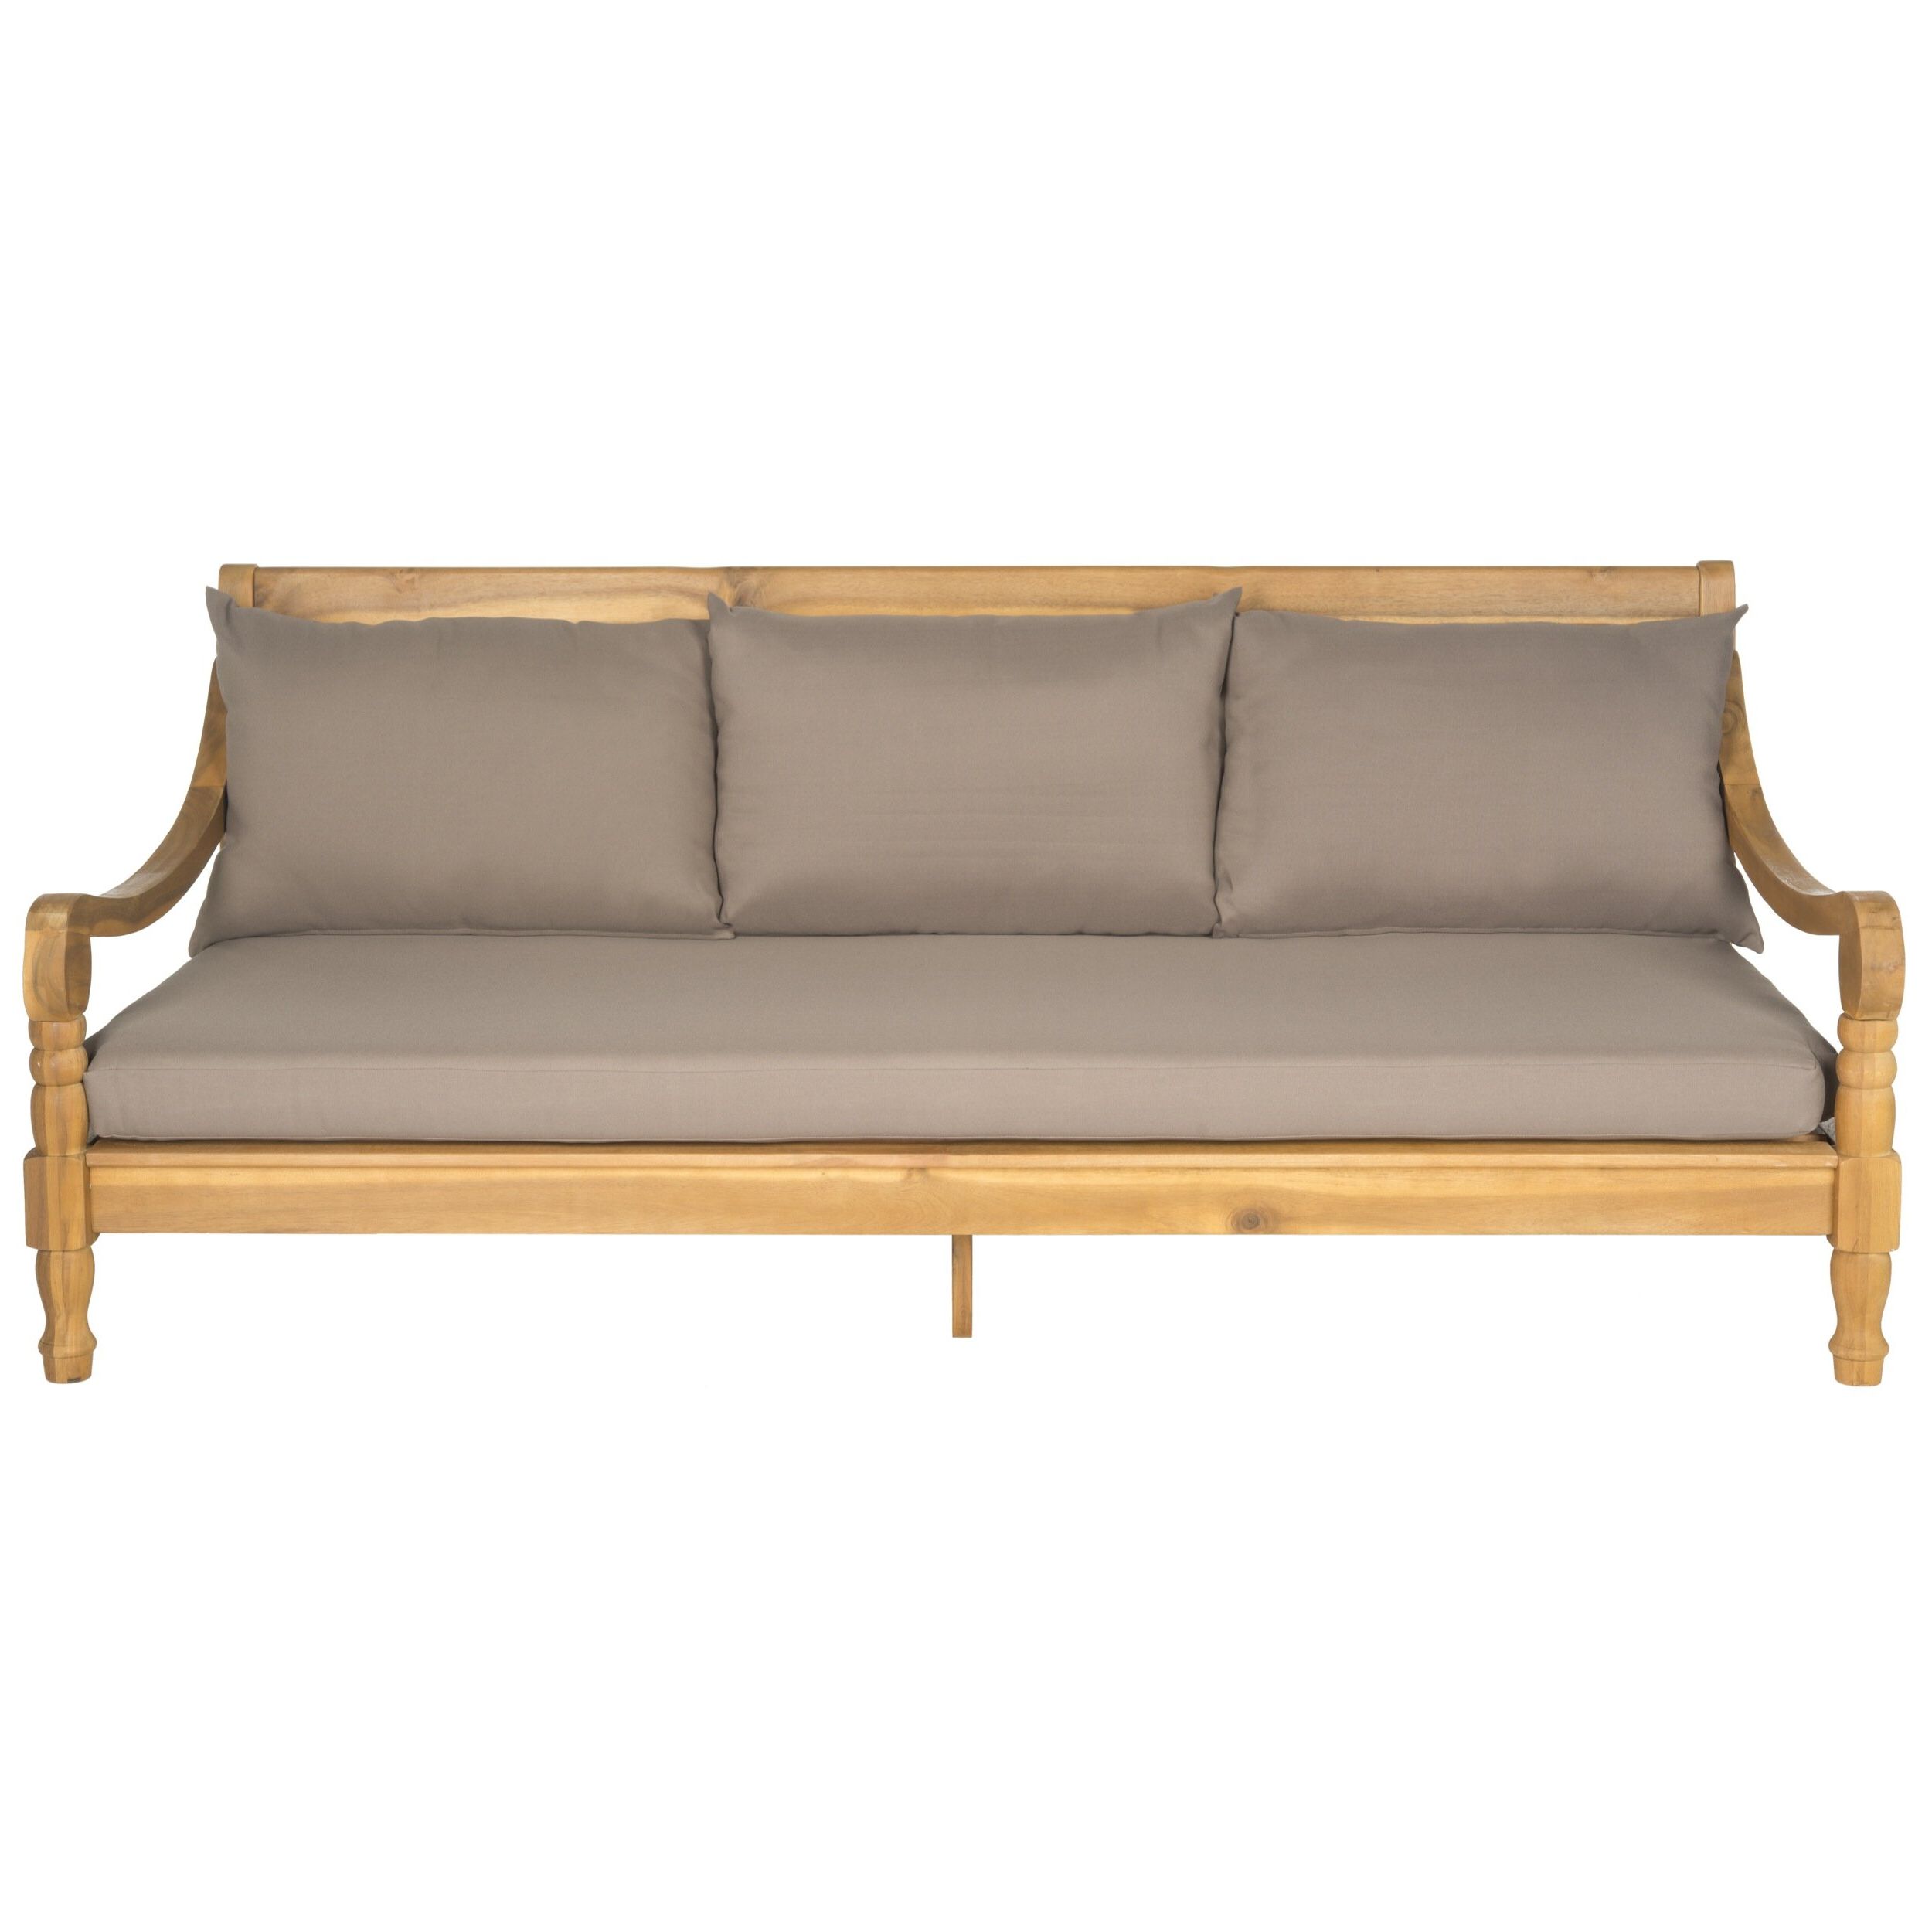 Most Popular Roush Teak Patio Daybed With Cushions Pertaining To Dowling Patio Daybeds With Cushion (View 13 of 25)